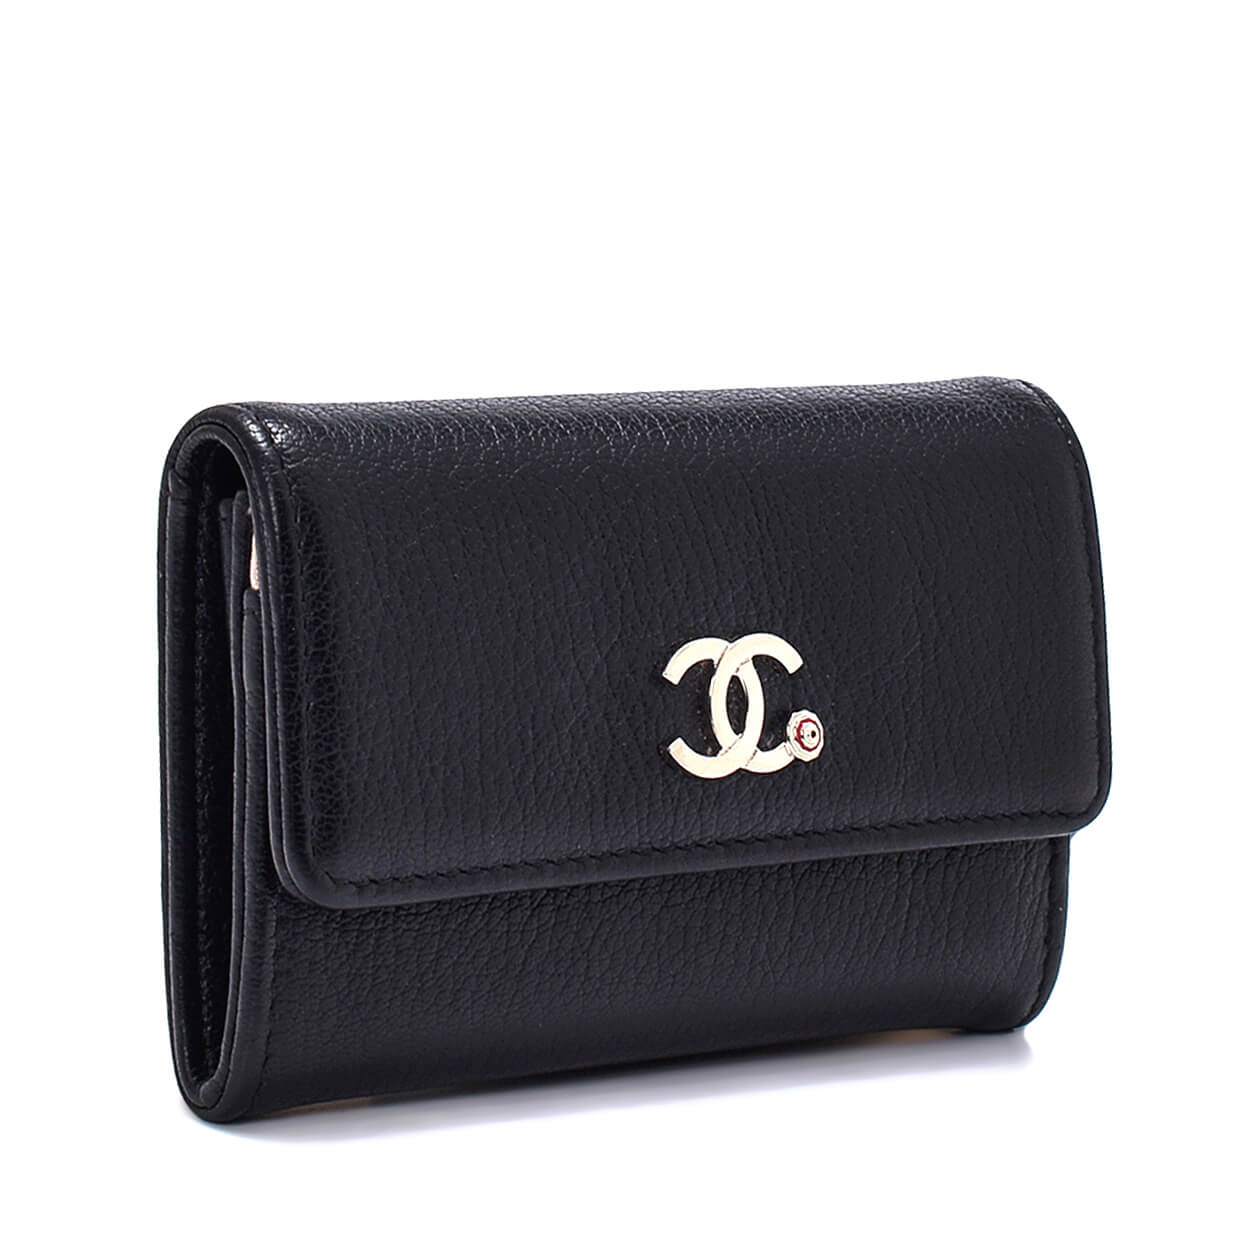 Chanel - Black Grained Leather CC Card Holder